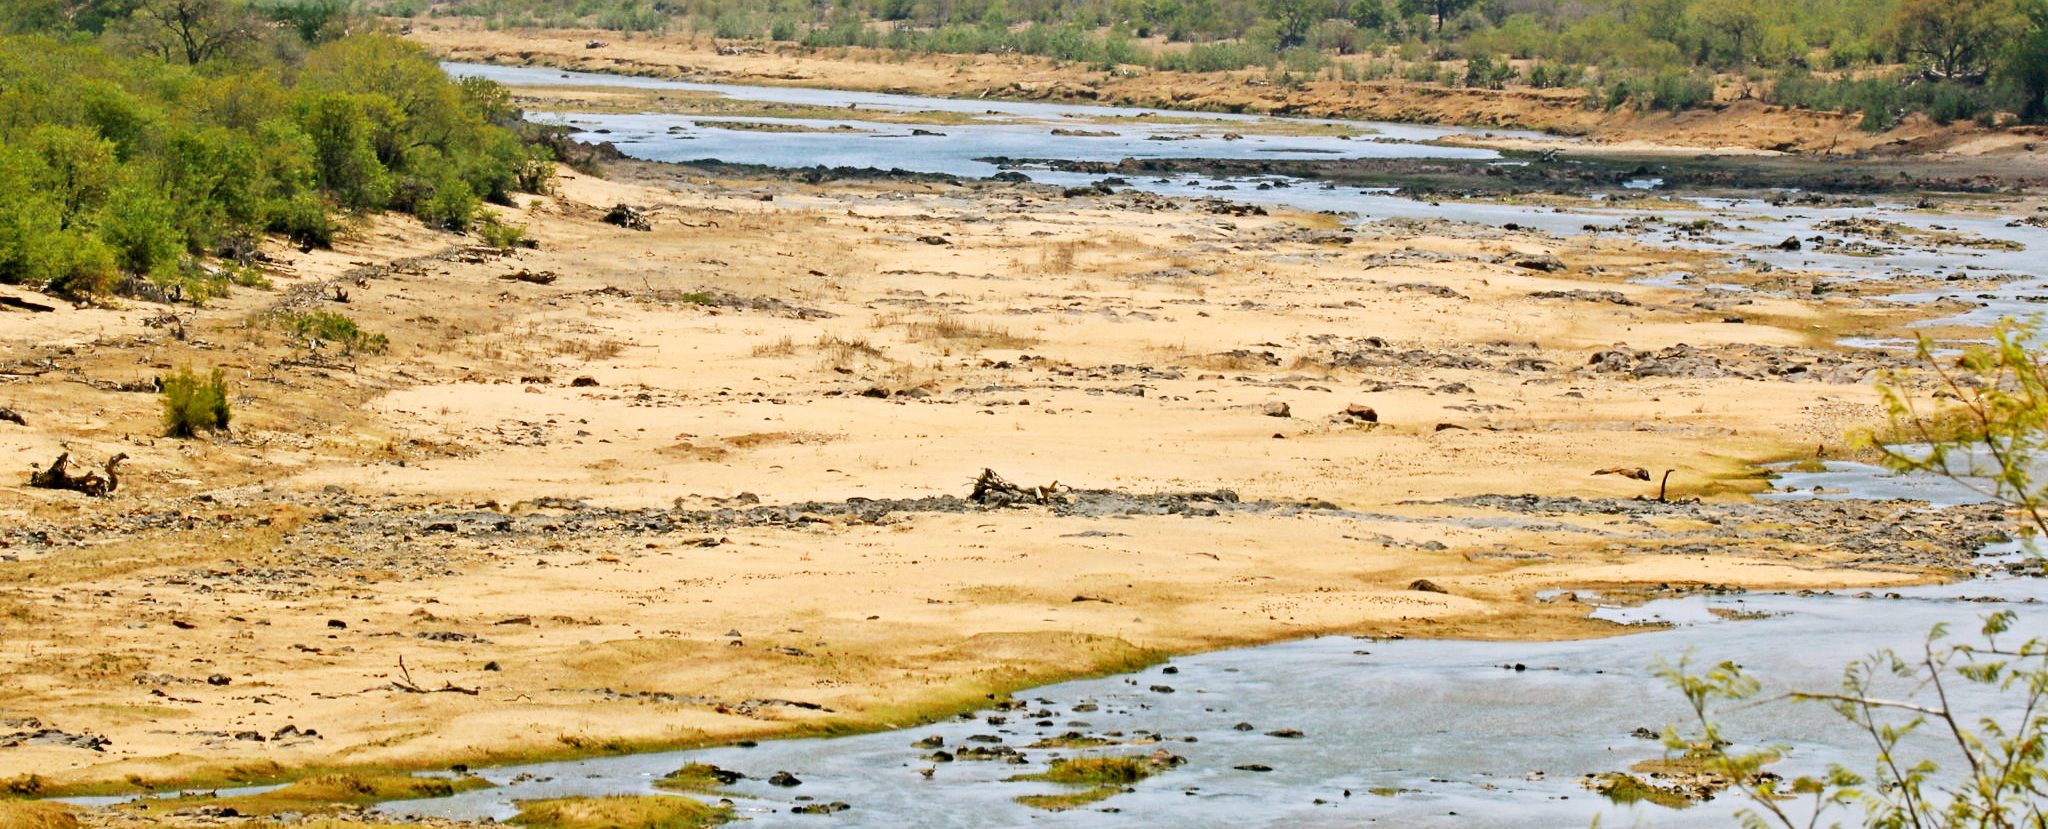 The Olifants River in South Africa during the 2015 drought